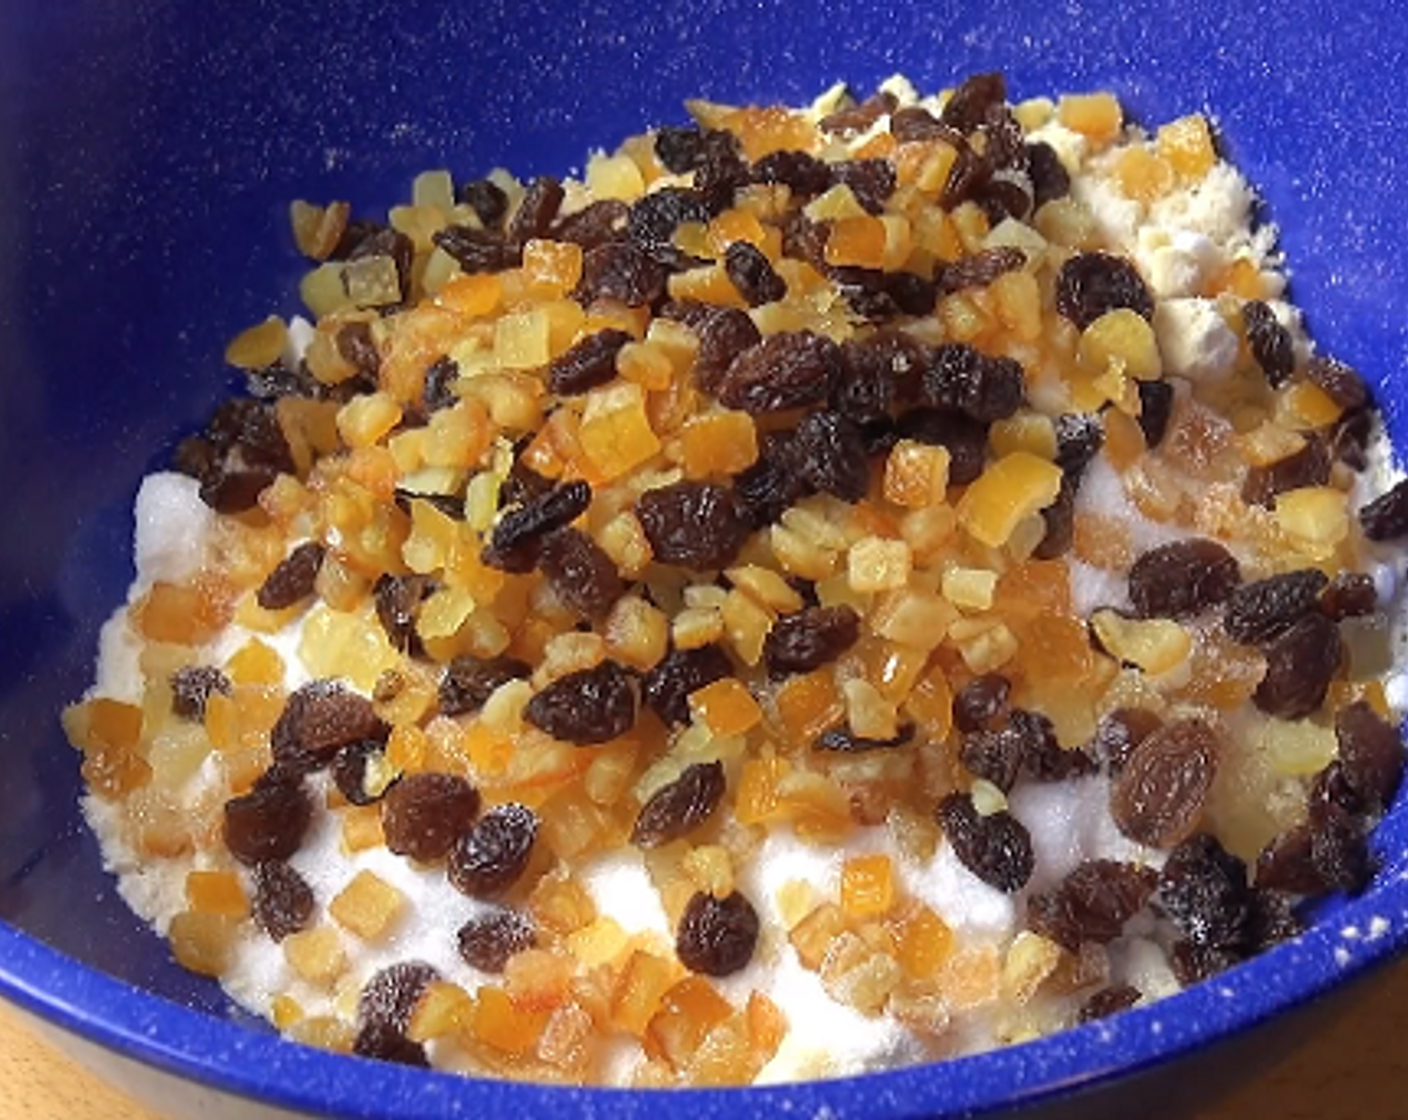 step 3 Next, sift Self-Rising Flour (1 cup) into a big mixing bowl. Add Breadcrumbs, Suet Mix (1/2 cup), Caster Sugar (1/3 cup), Sultanas (1/3 cup) and Mixed Dried Citrus Peels (1/3 cup).